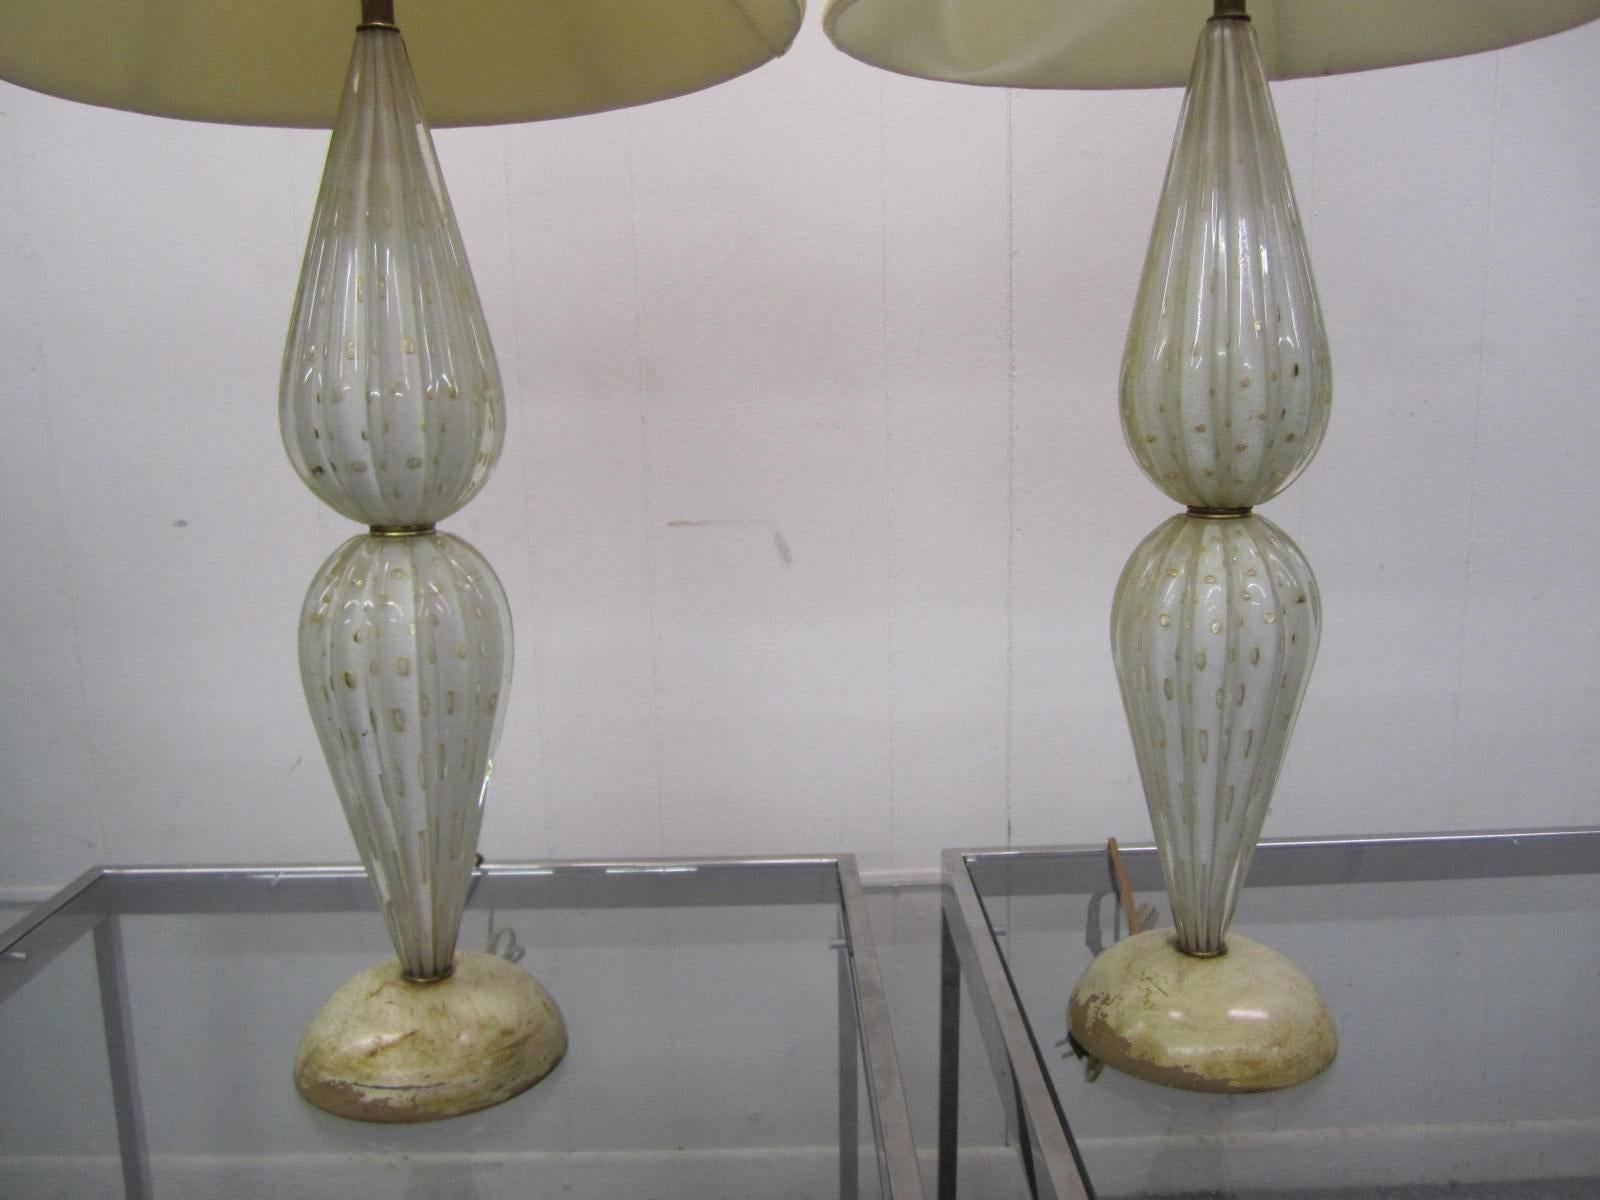 Beautiful pair of Barovier & Toso Murano lamps, glass is clear over white with gold flecking. We love the refined glass with the shabby chic patinated bases.